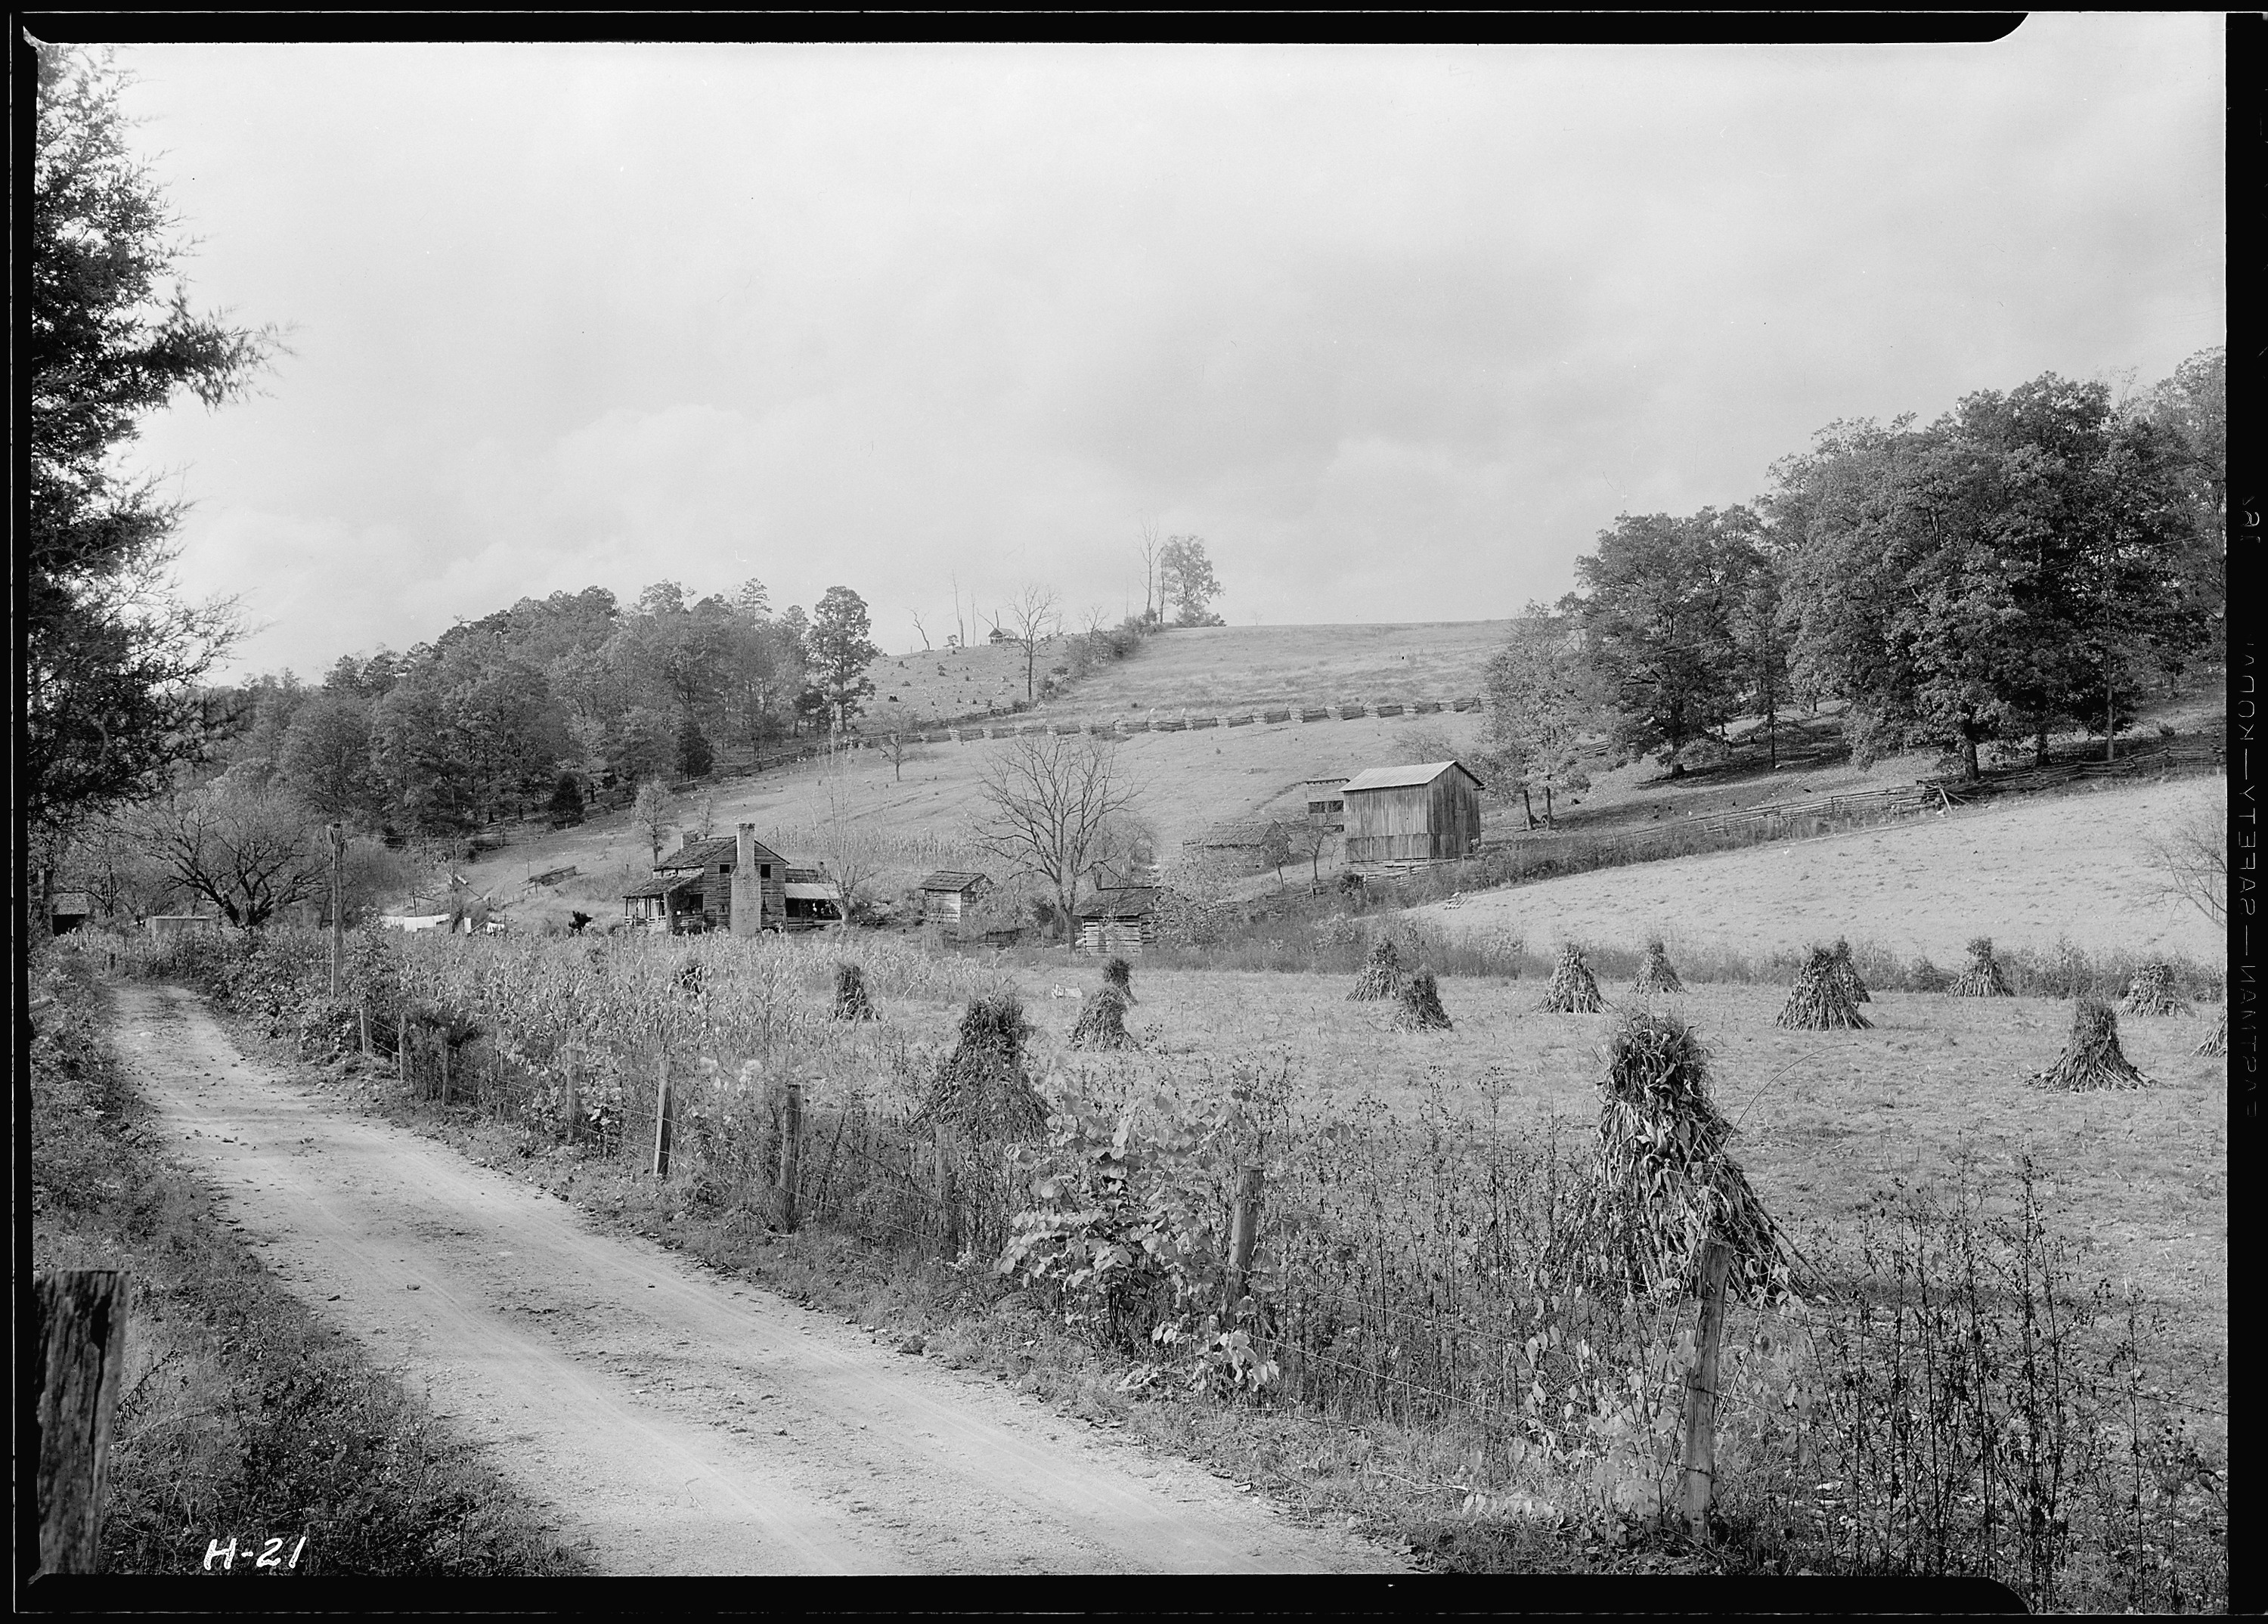 -The_Stooksberry_homestead_near_Andersonville,_Tennessee._This_land_will_be_submerged_by_the_Norris_Dam_Reservoir.-_-_NARA_-_532645